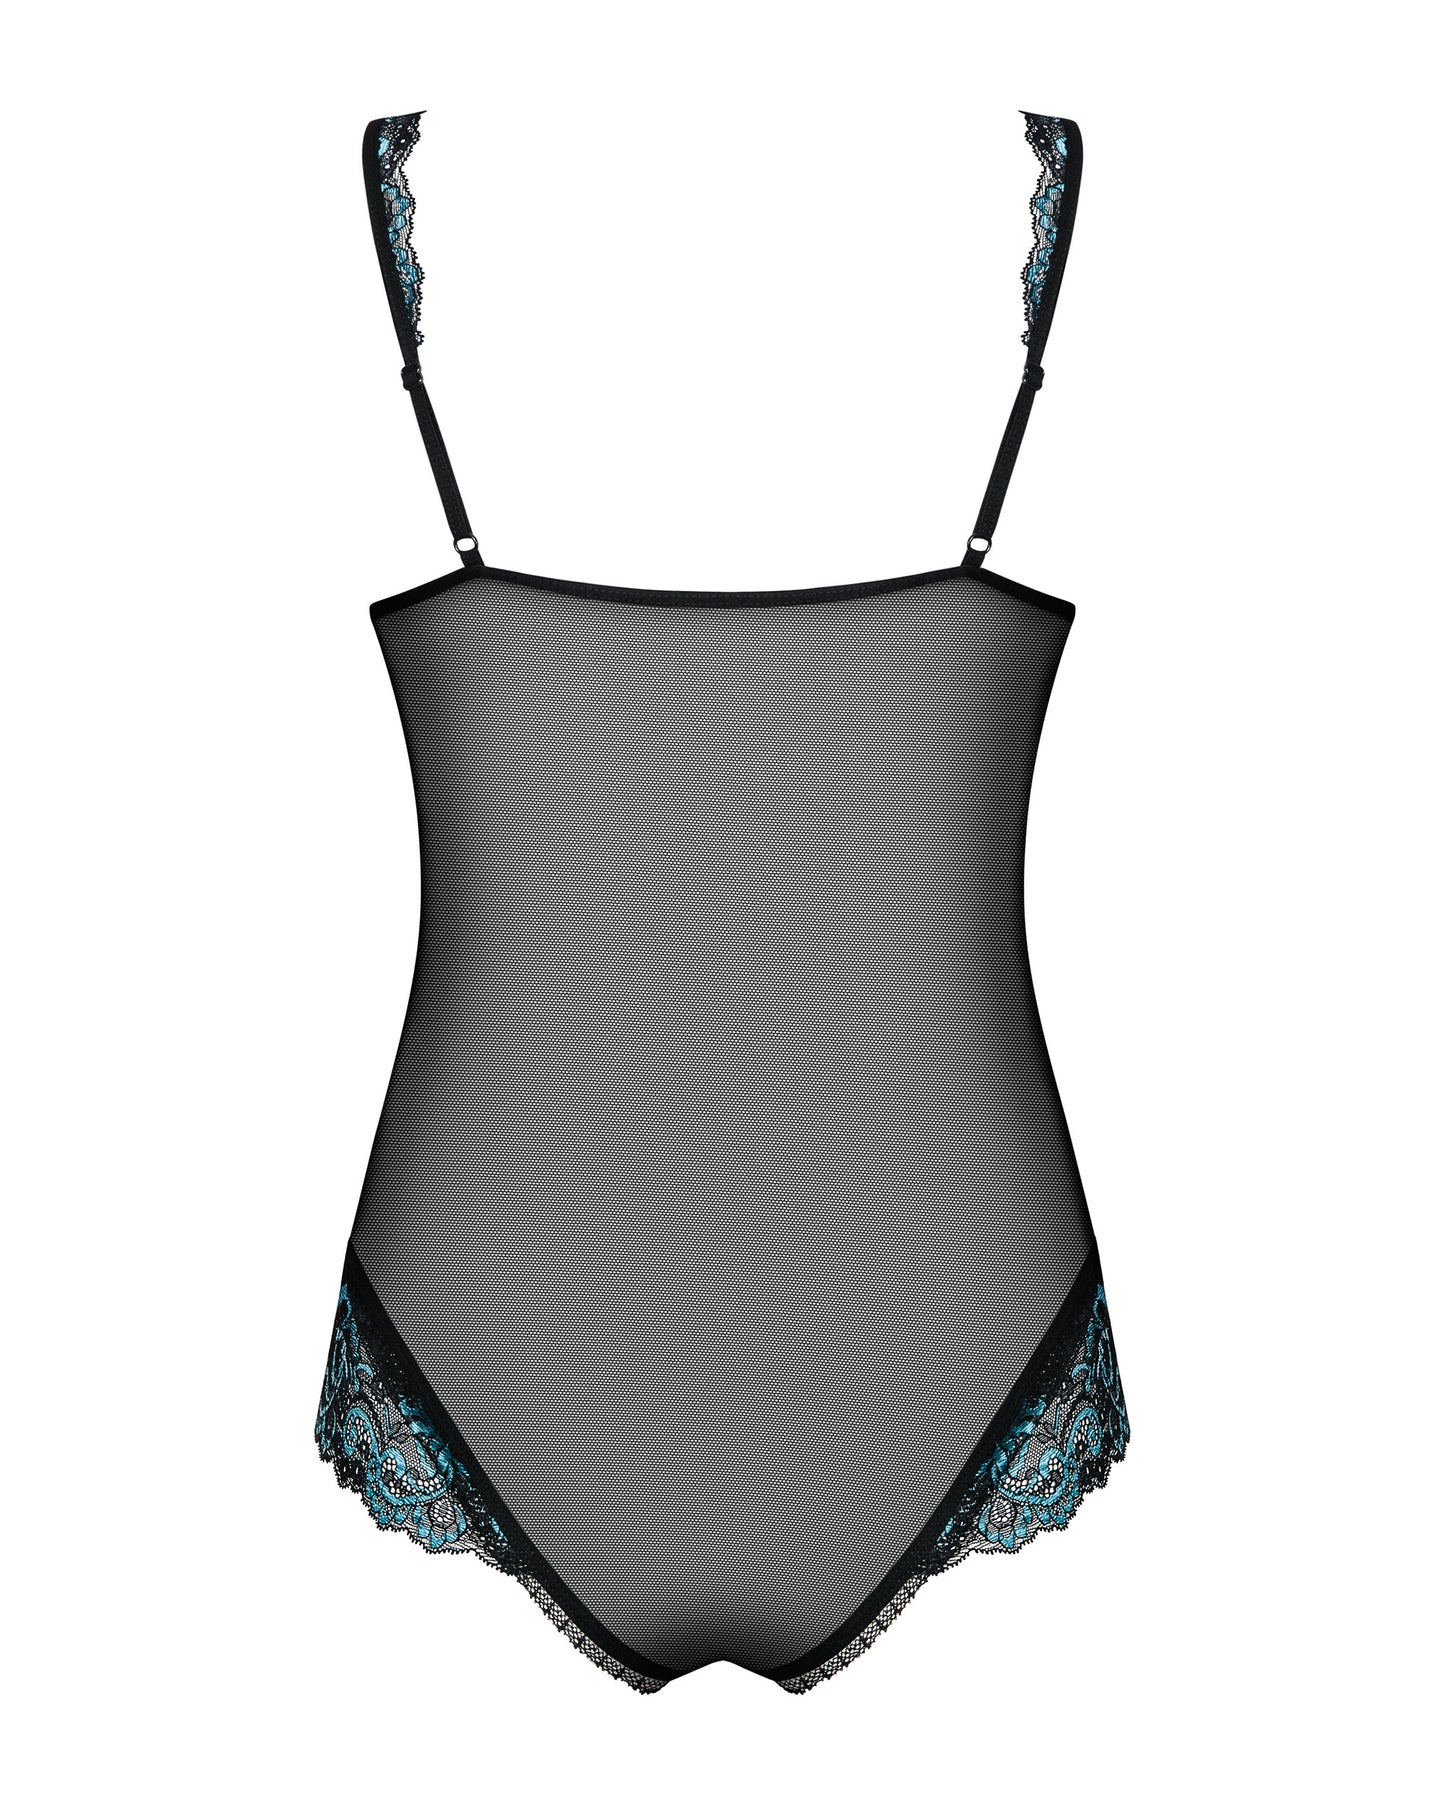 Stunning Turquoise two toned lace, Soft sensual Mesh. With underwire cups and a turquoise pendant between. This gorgeously crafted Teddy is the perfect date night underwear with the open crotch detail and lace trims adding a seductive twist.